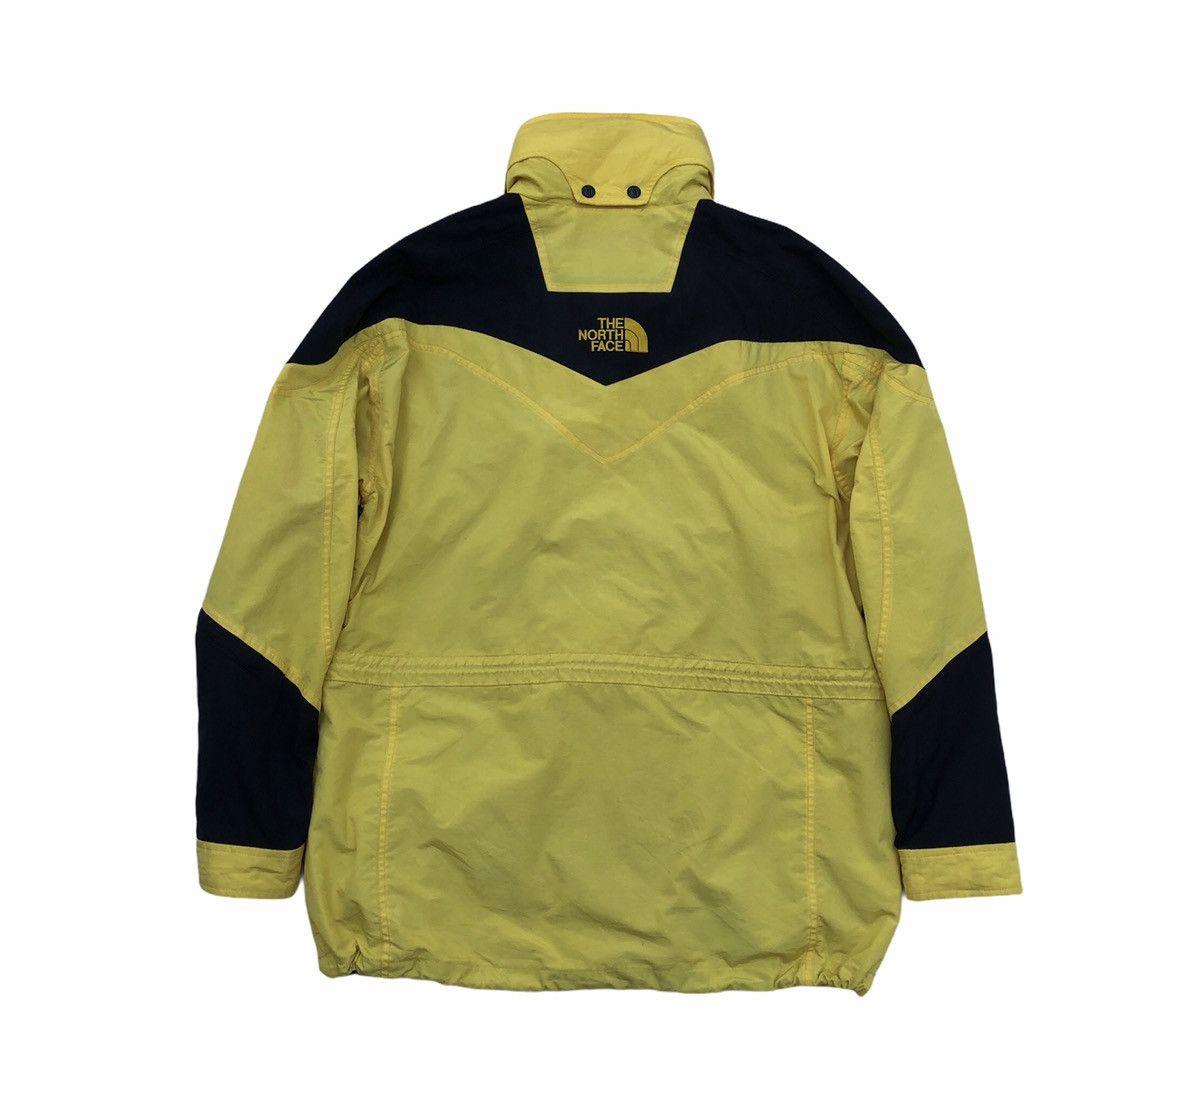 The North Face 🔥The North Face Zip Button Up Man Hooded Jacket Size US L / EU 52-54 / 3 - 5 Thumbnail